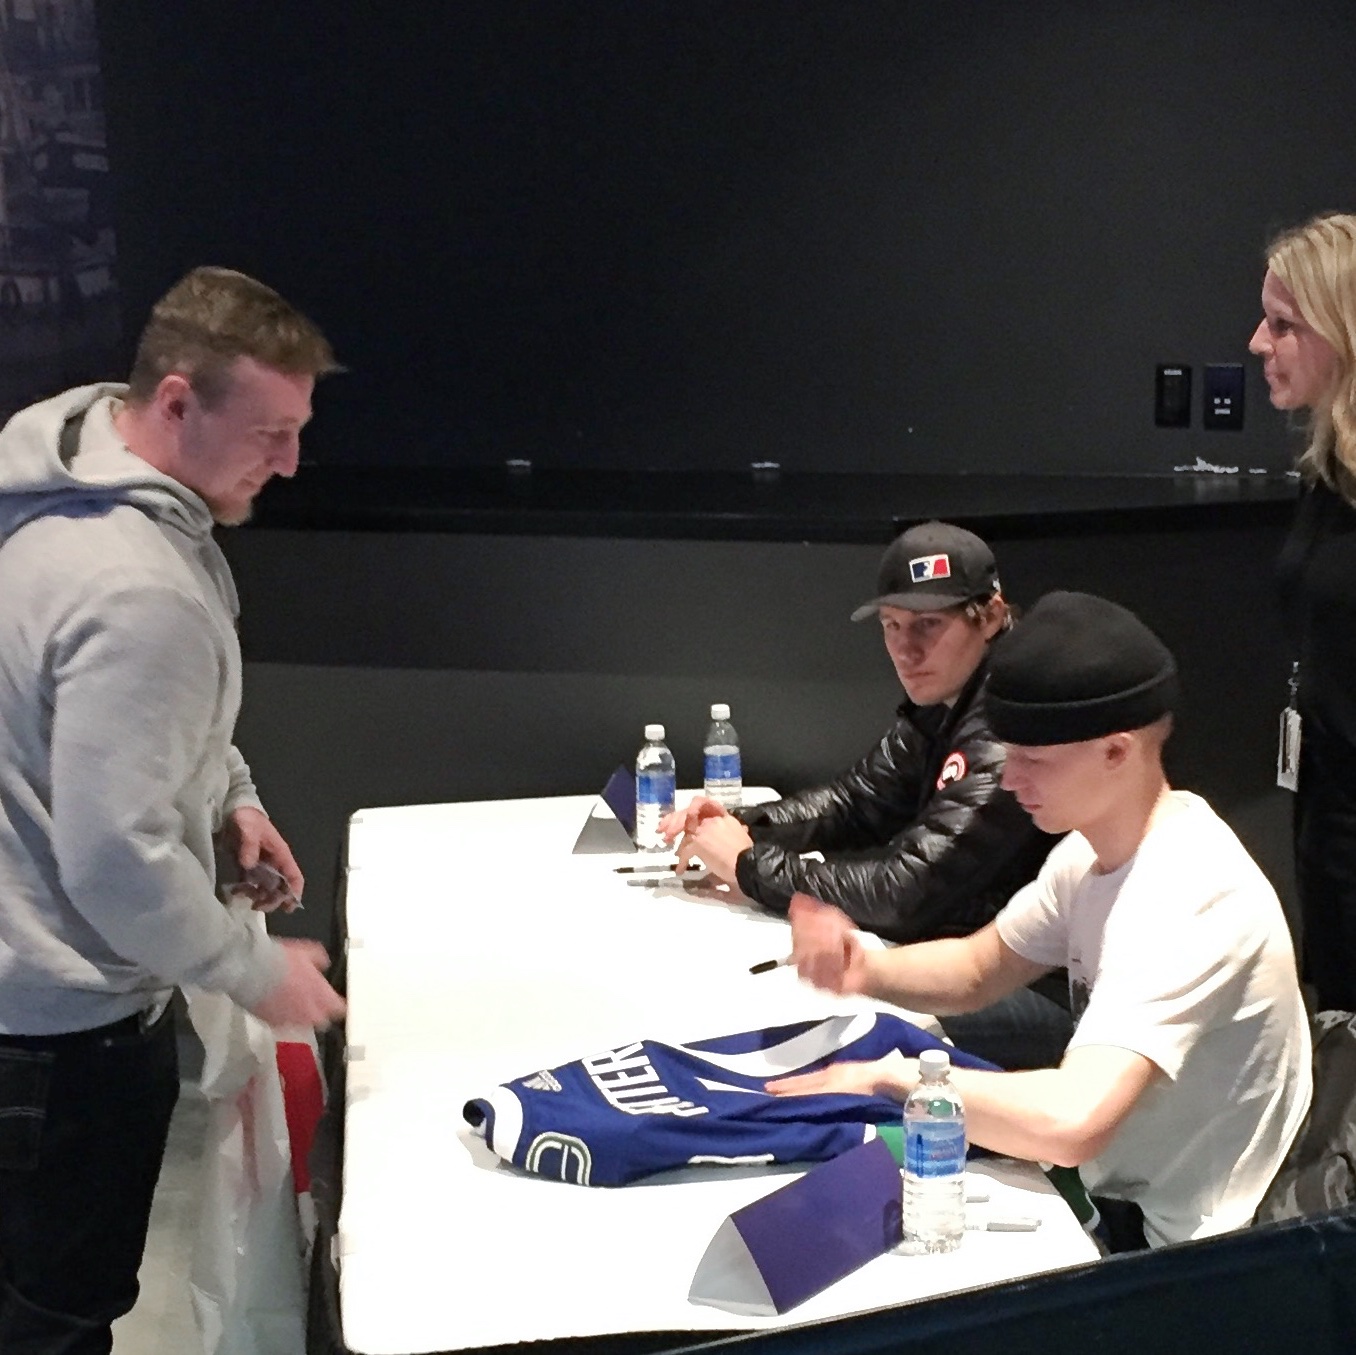 A tiny Pettersson signs autographs at Canucks Season Ticket Holder event